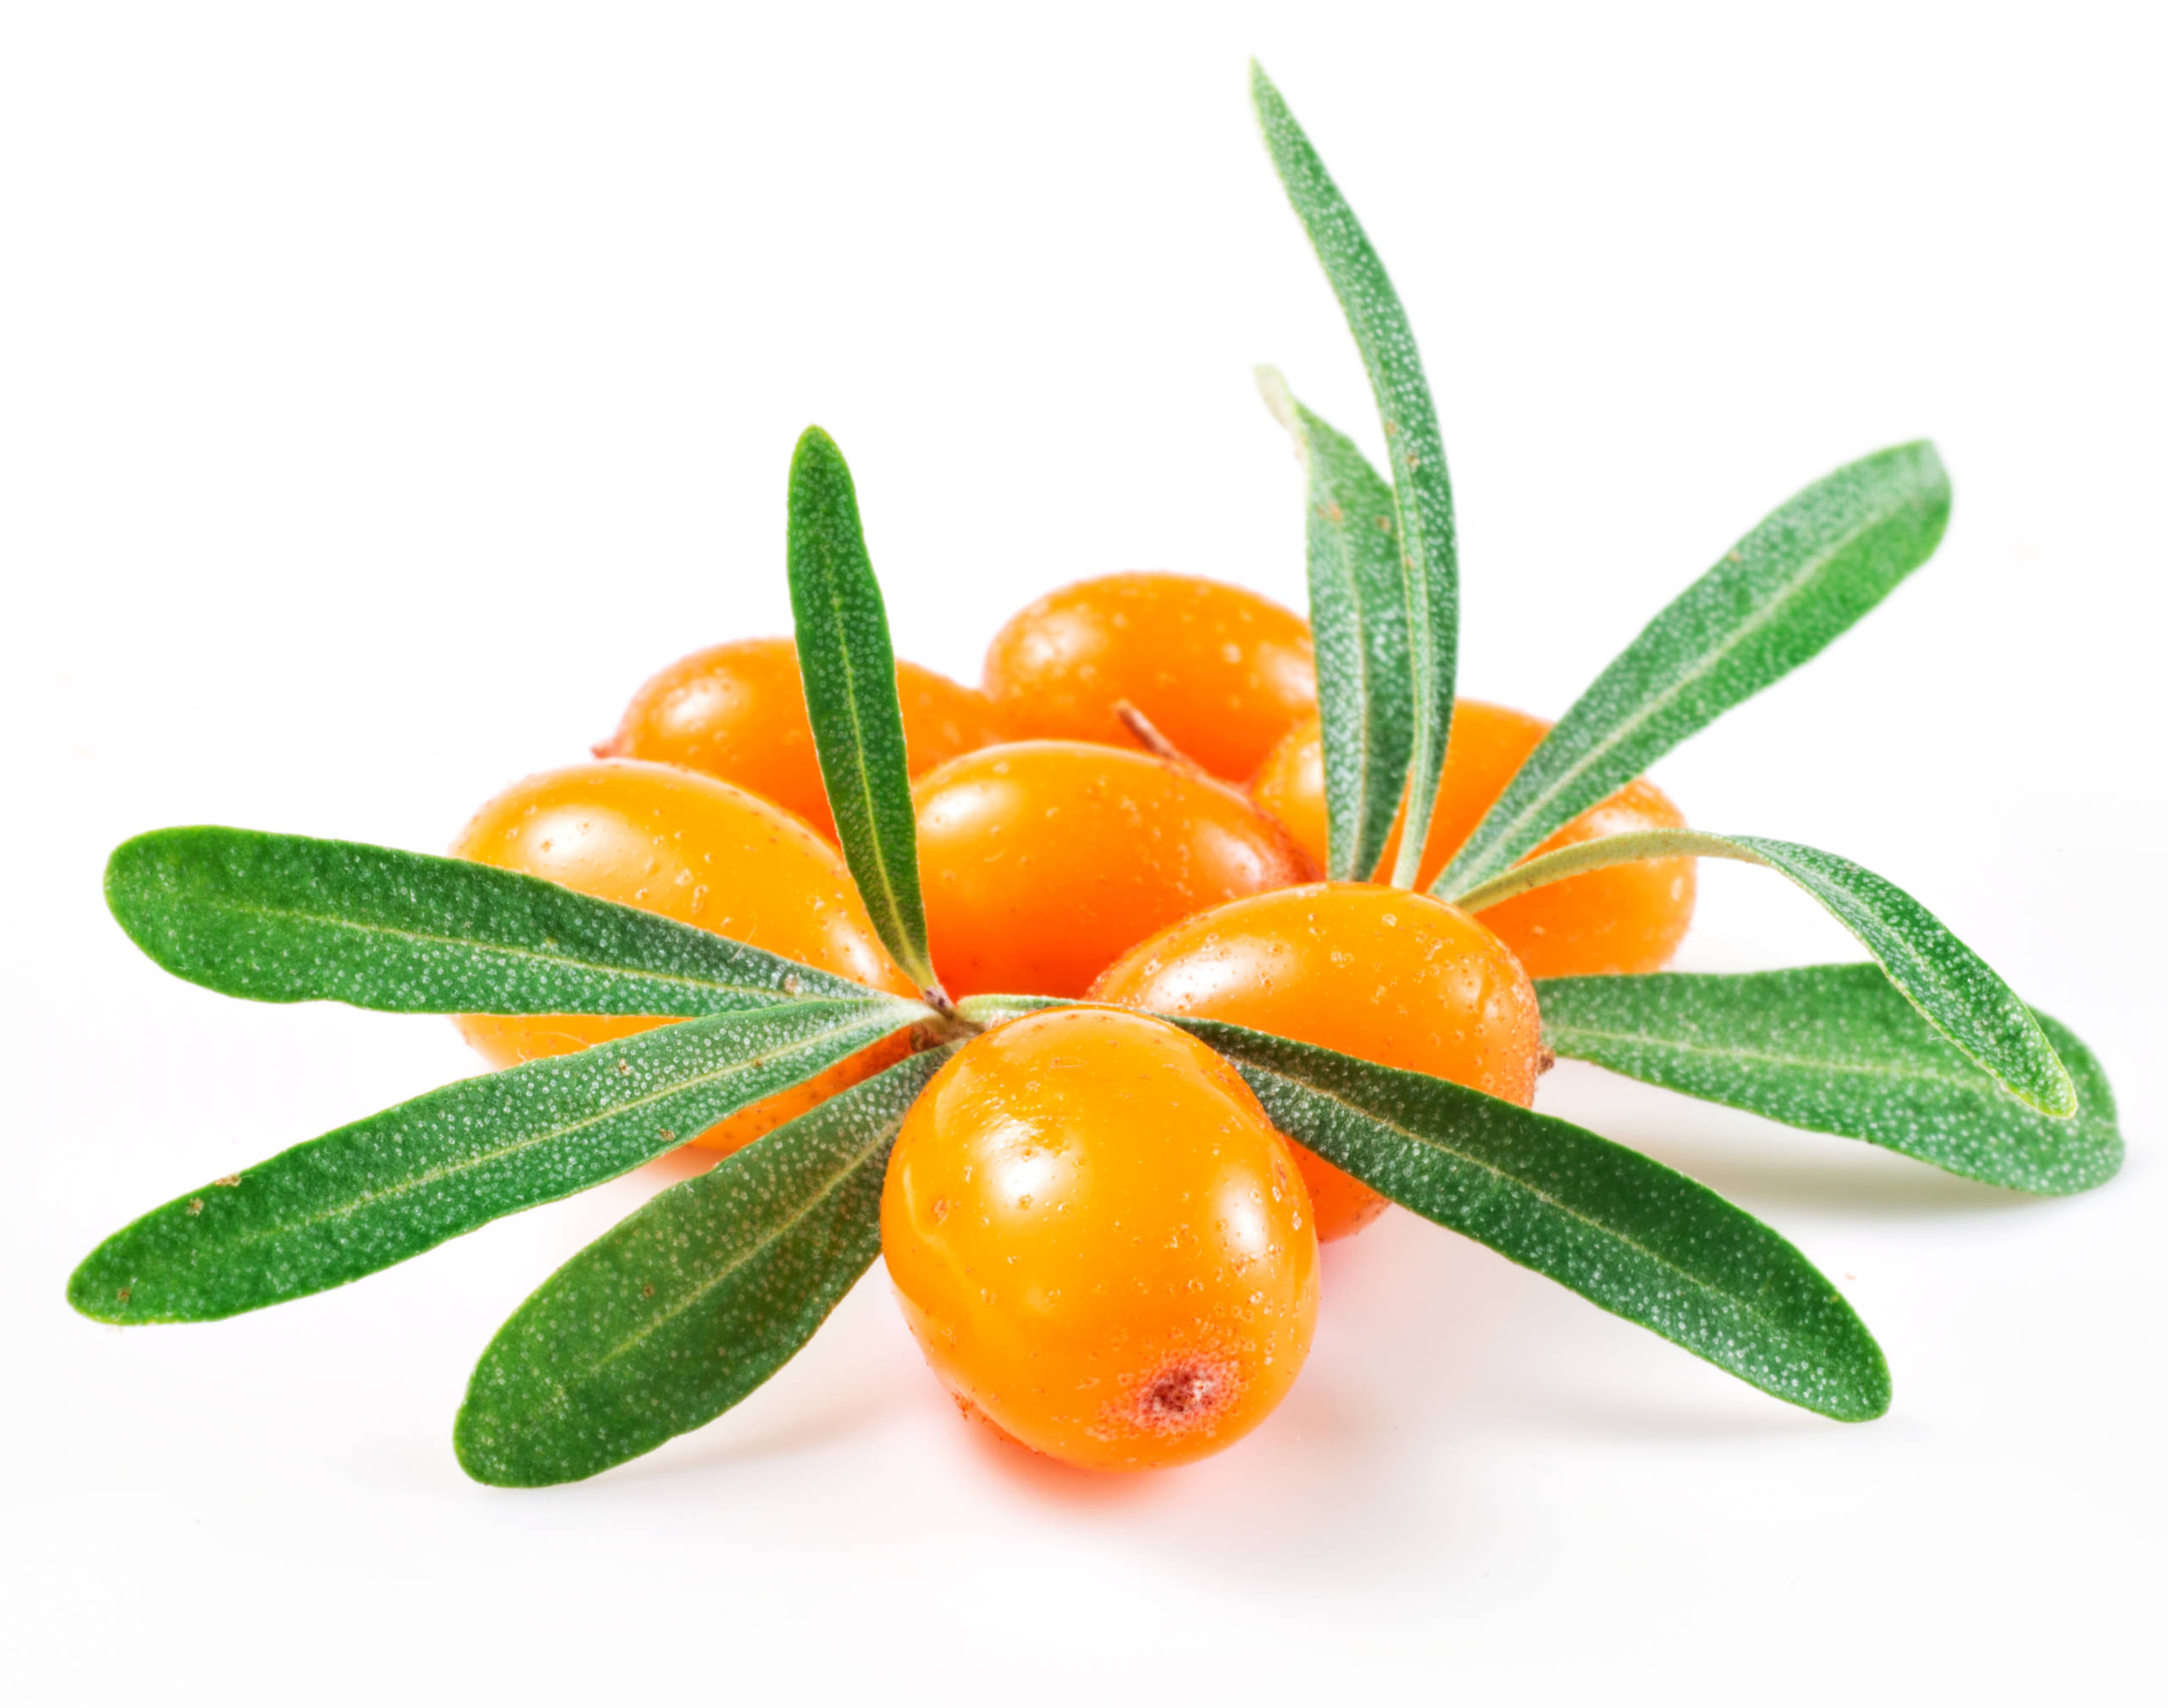 Sea buckthorn isolated on the white